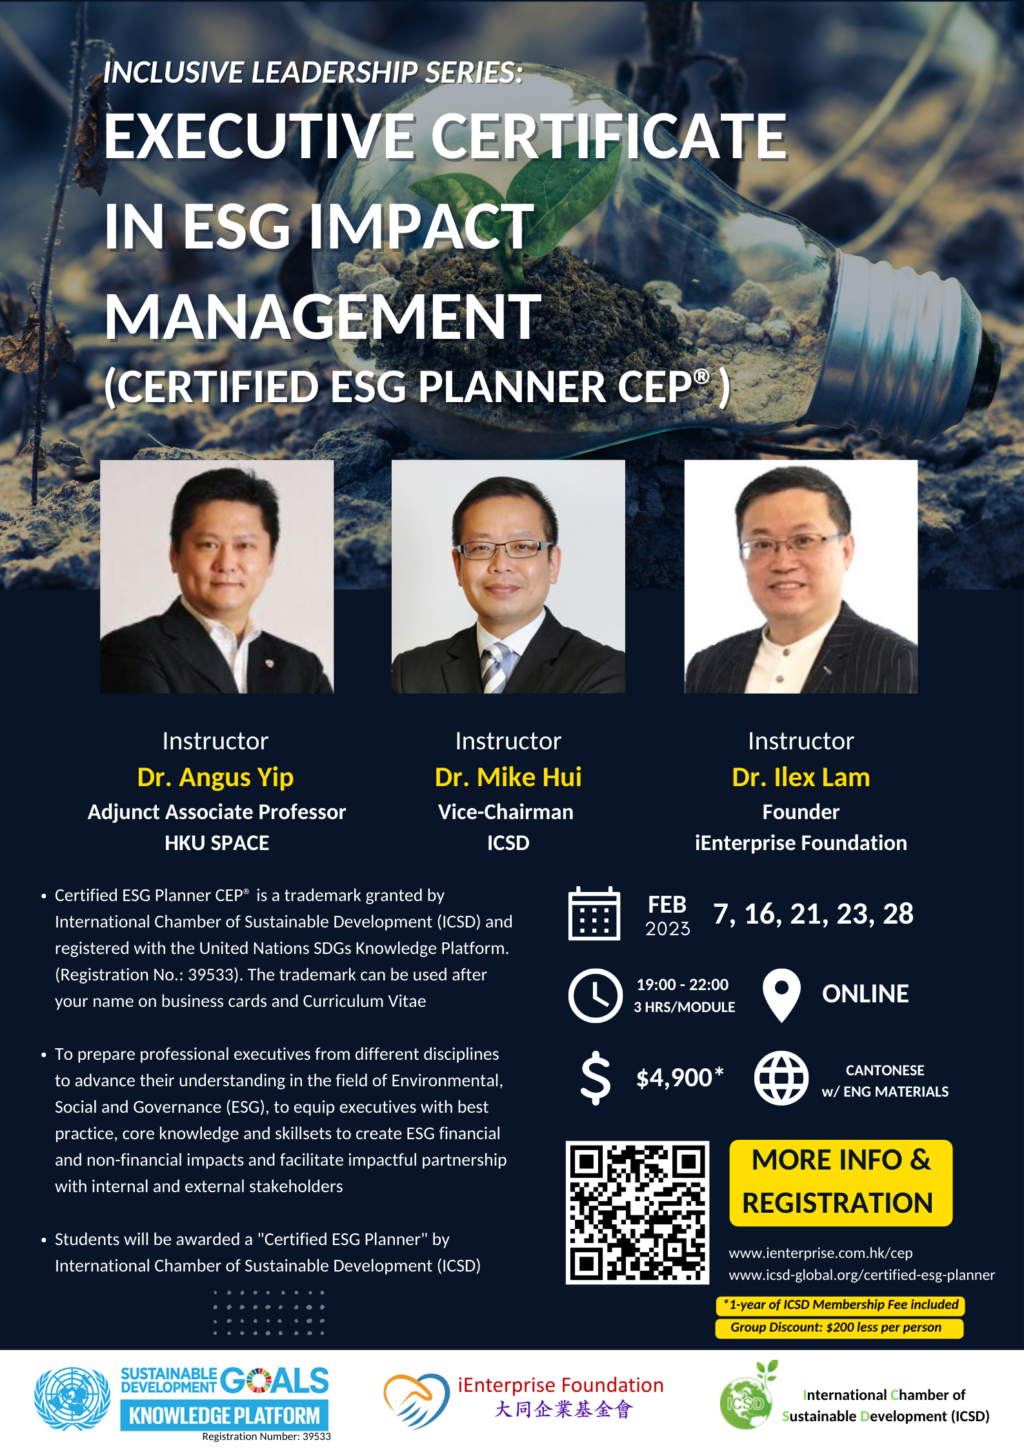 This is a poster about Inclusive Leadership Series: Executive Certificate in ESG Impact Management (Certified ESG Planner CEP®). The information above is mentioned with text in the collapsible parts below.